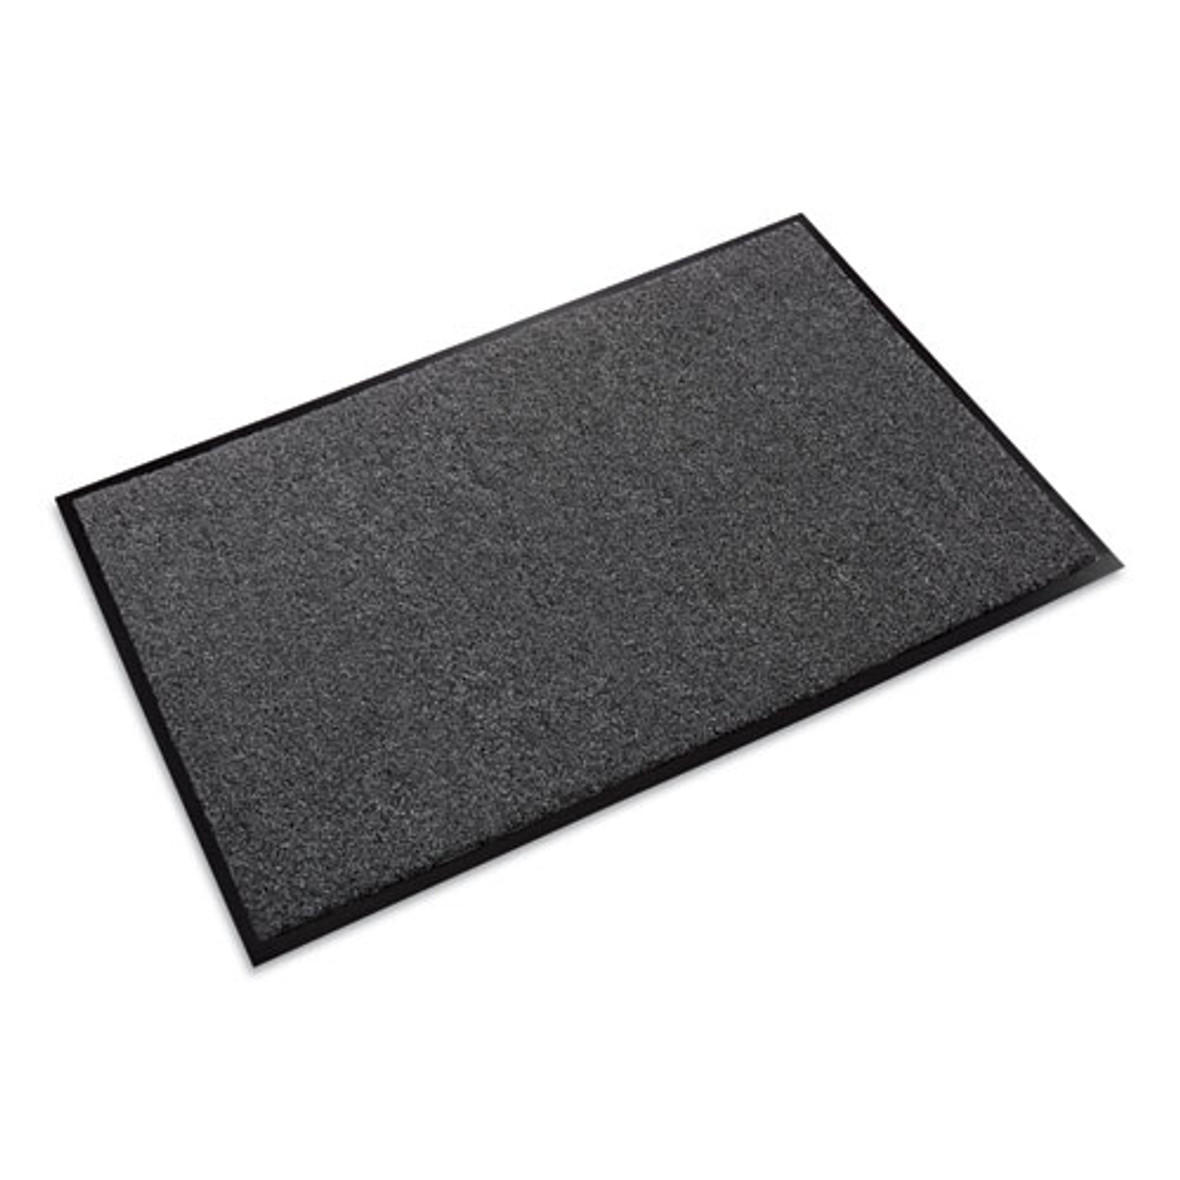 Crown Mats & Matting Rely-On Olefin Indoor Wiper Mat, 36 x 48, Charcoal